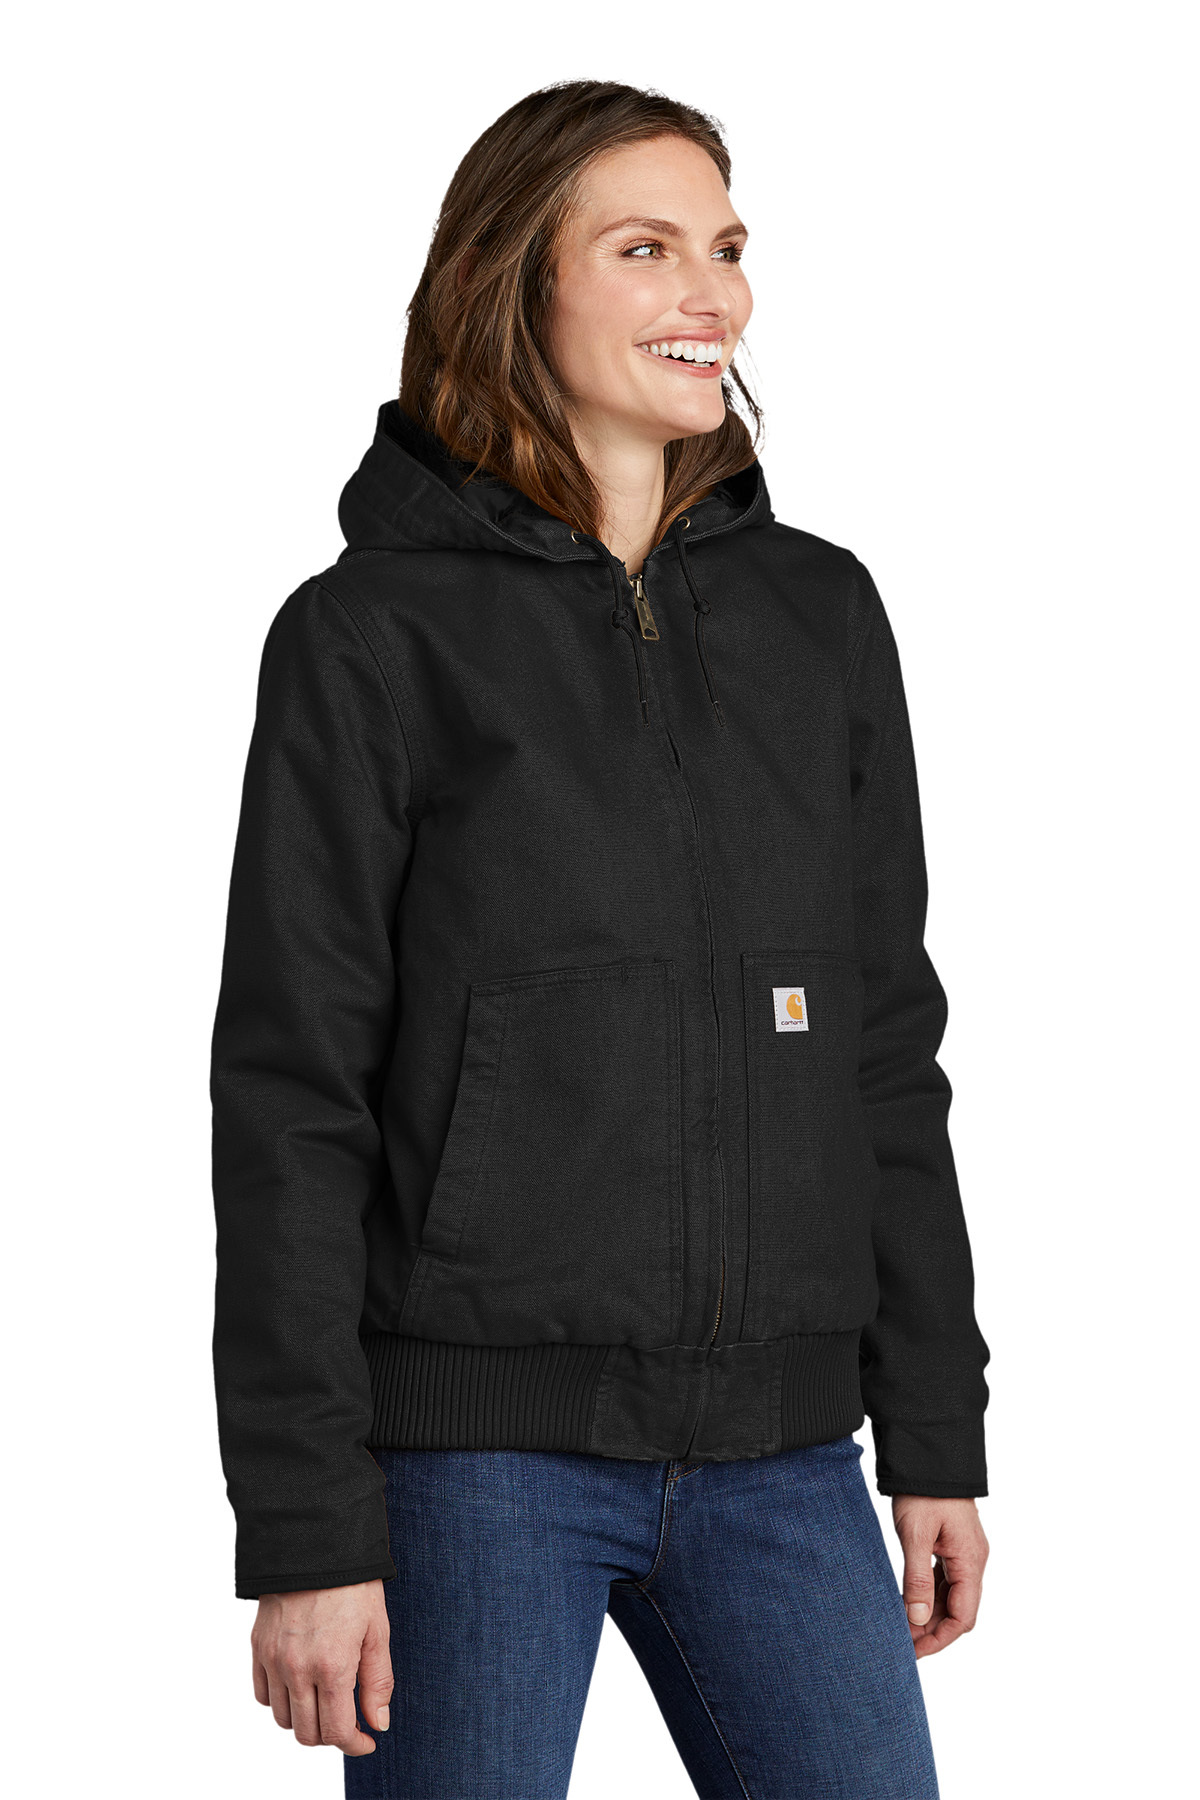 Carhartt Women’s Washed Duck Active Jac | Product | Company Casuals